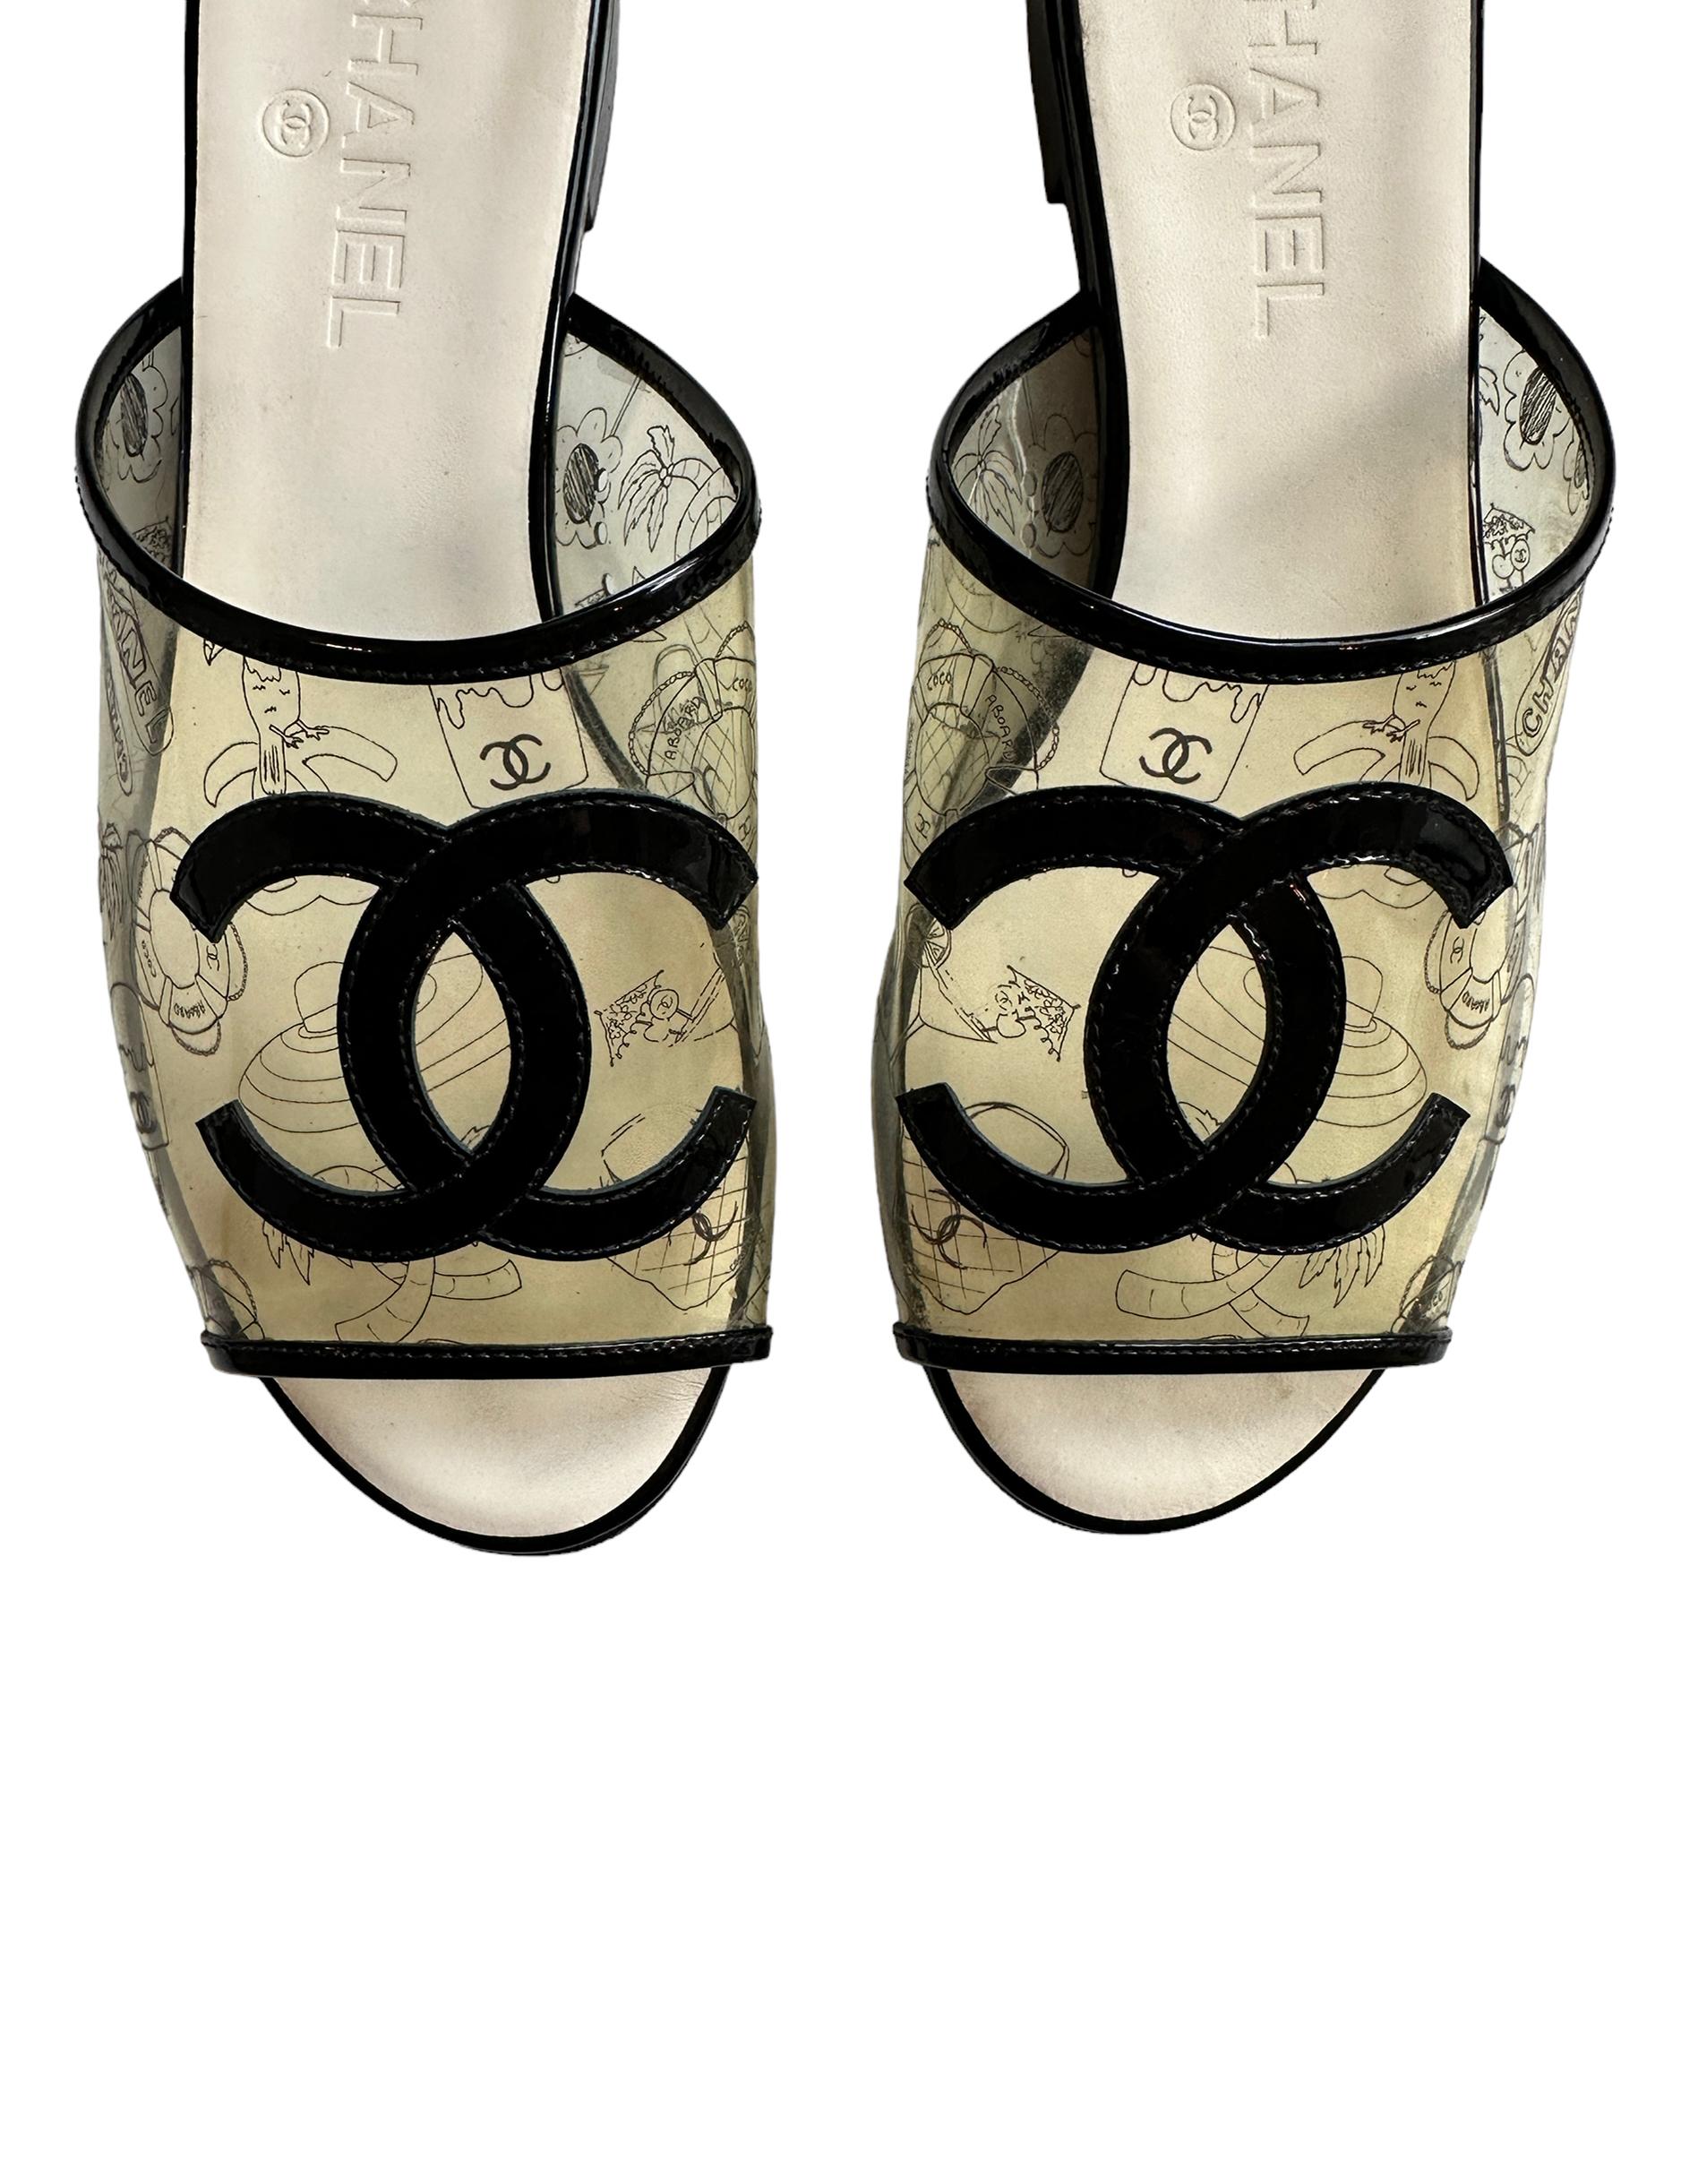 Chanel 2019 Printed PVC CC Logo Slides sz 40C. Features beach theme print 

Made In: Italy
Color: Black, white, beige
Materials: Leather and PVC
Closure/Opening: Slide on
Overall Condition: Very good. Some wear throughout
Marked Size: 40C